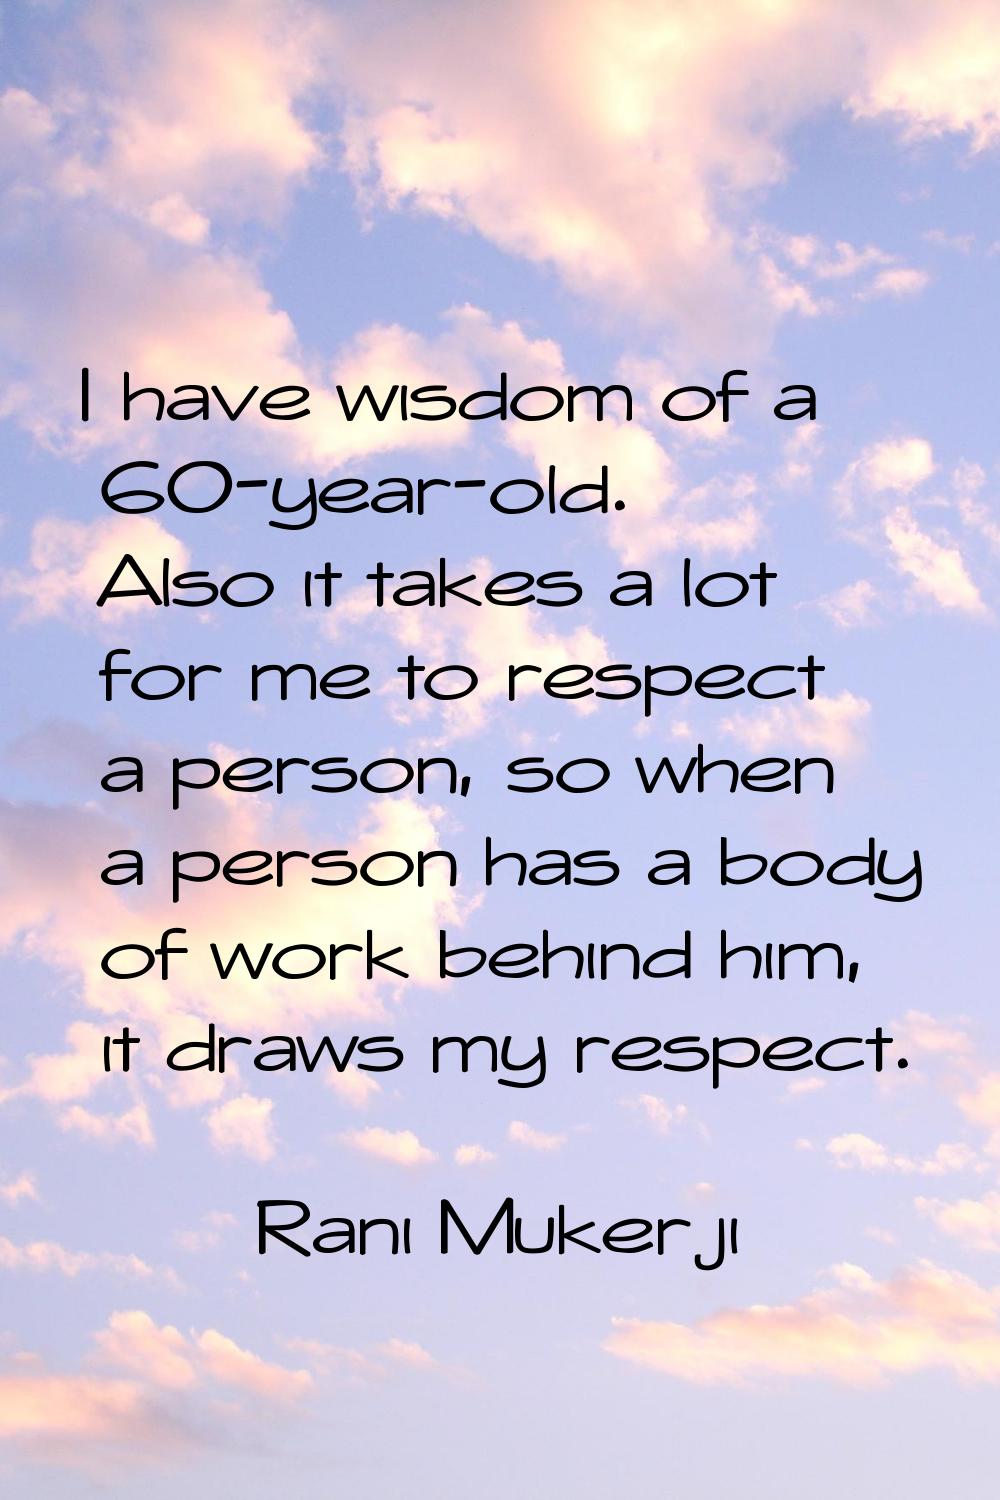 I have wisdom of a 60-year-old. Also it takes a lot for me to respect a person, so when a person ha